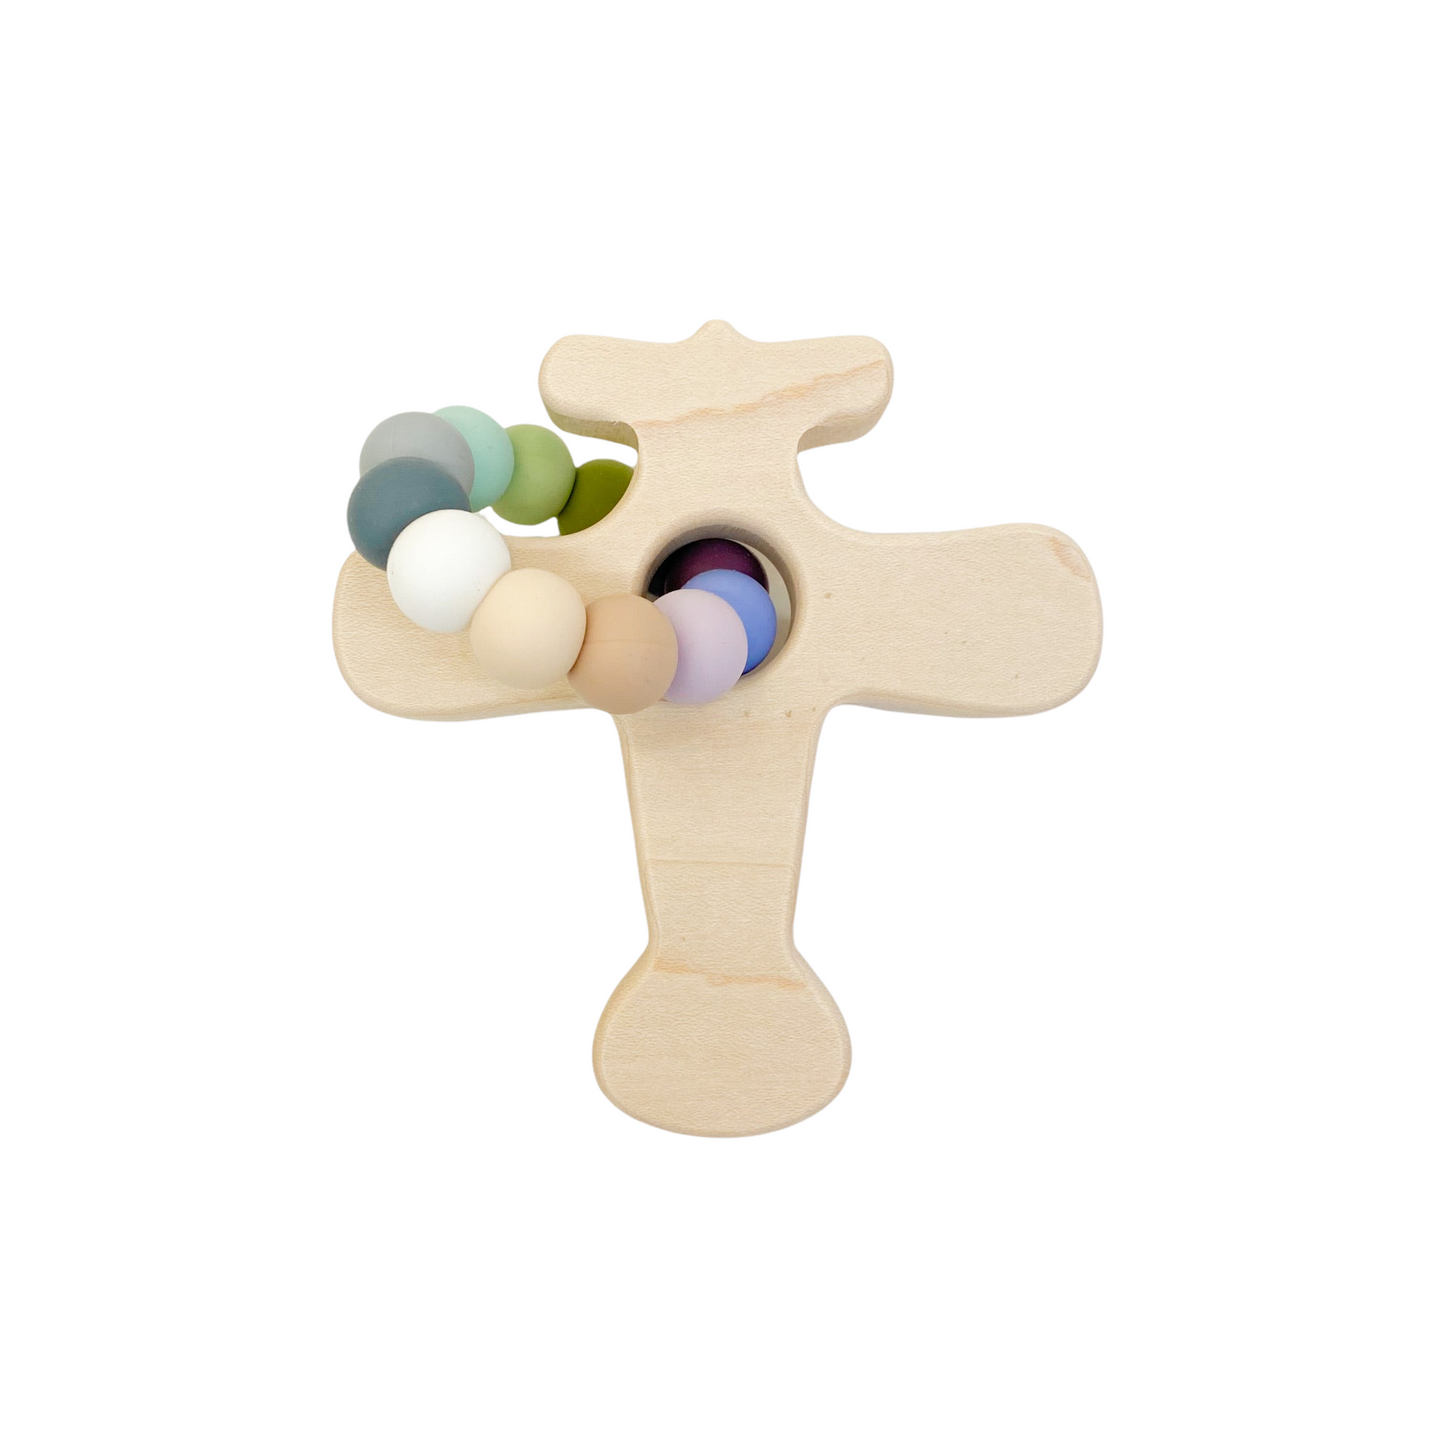 BR Wooden Toy/Teether - Airplane